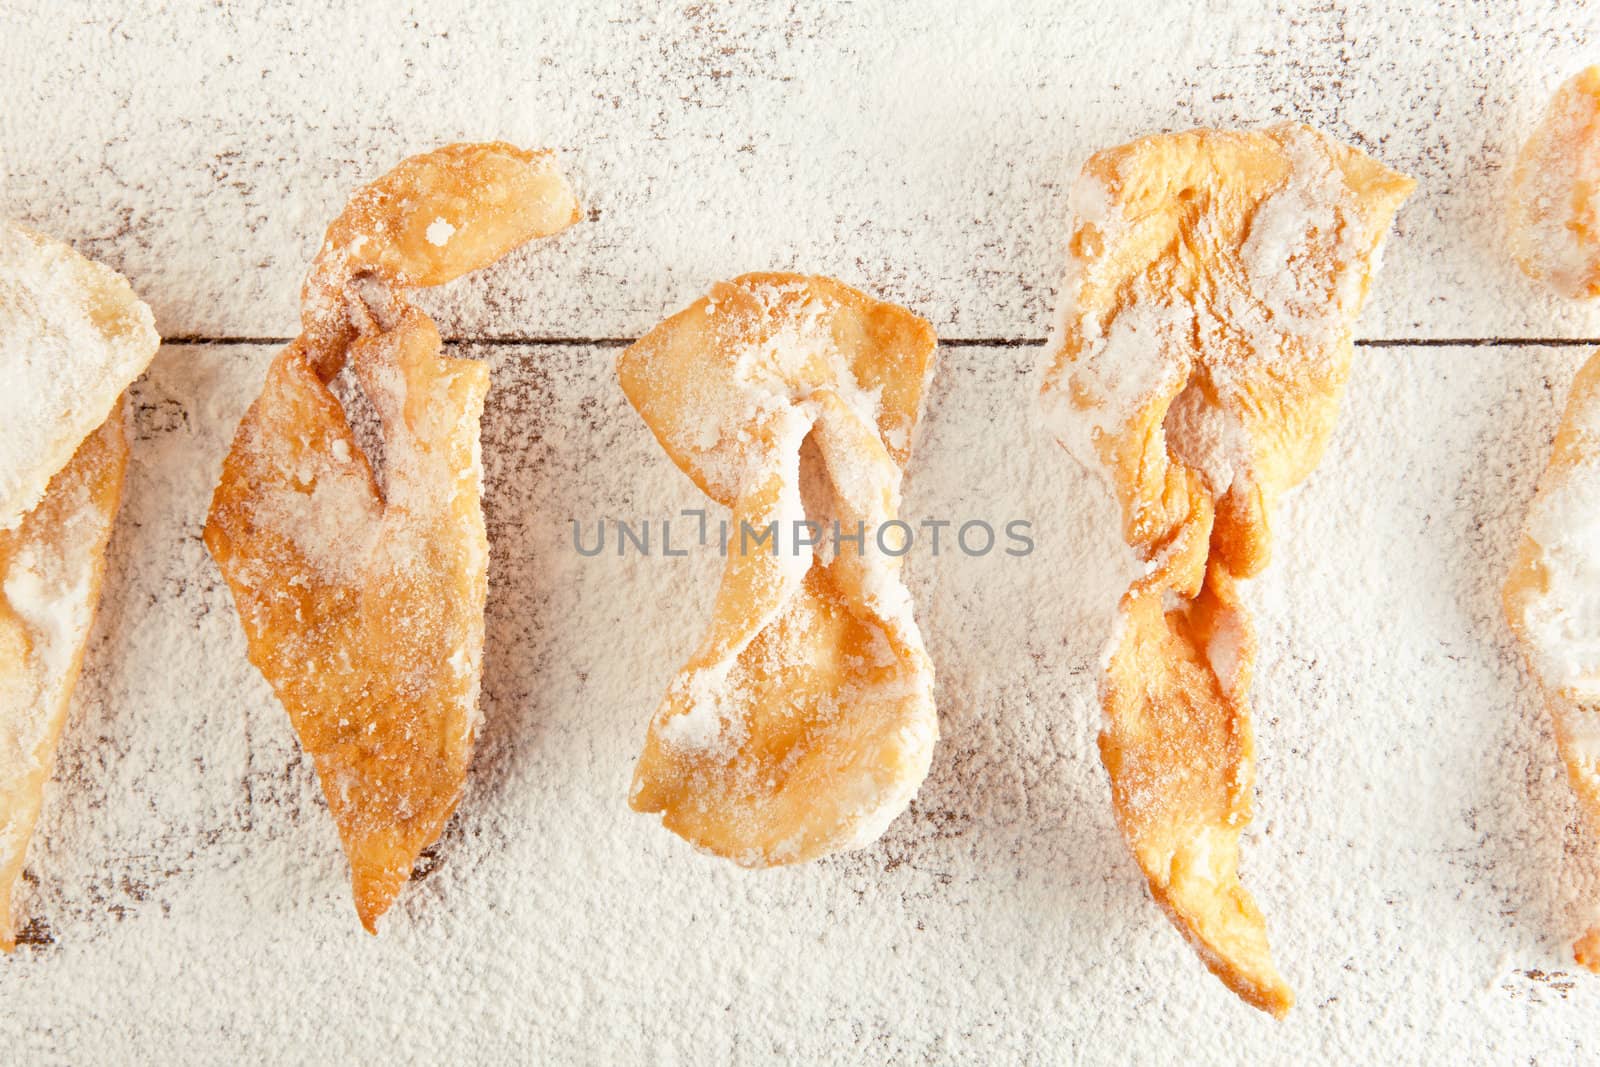 Sugar-coated strips of dough fried in oil  on the wooden table